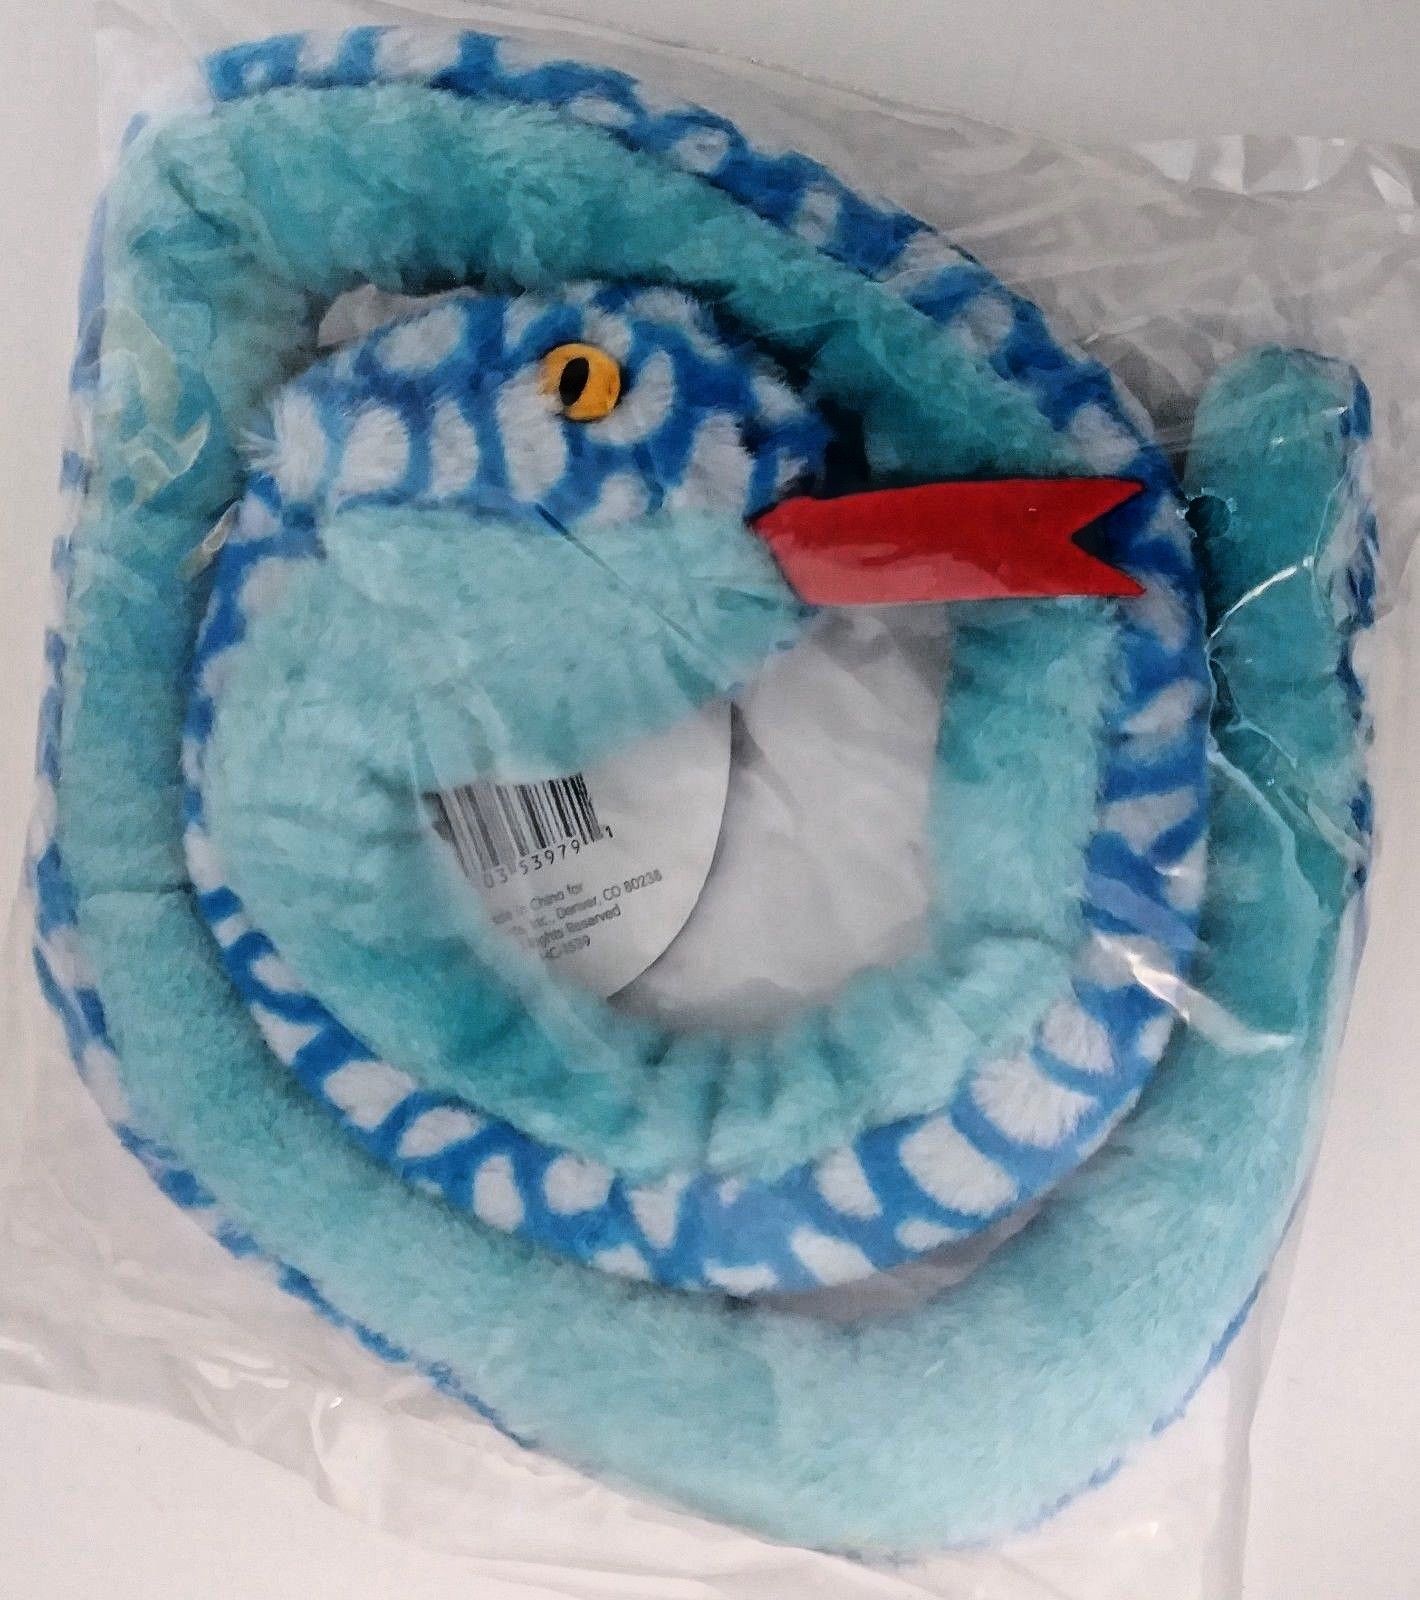 Booda 53979 Soft Bite Plush Snakes For Dogs (Blue With Spots)